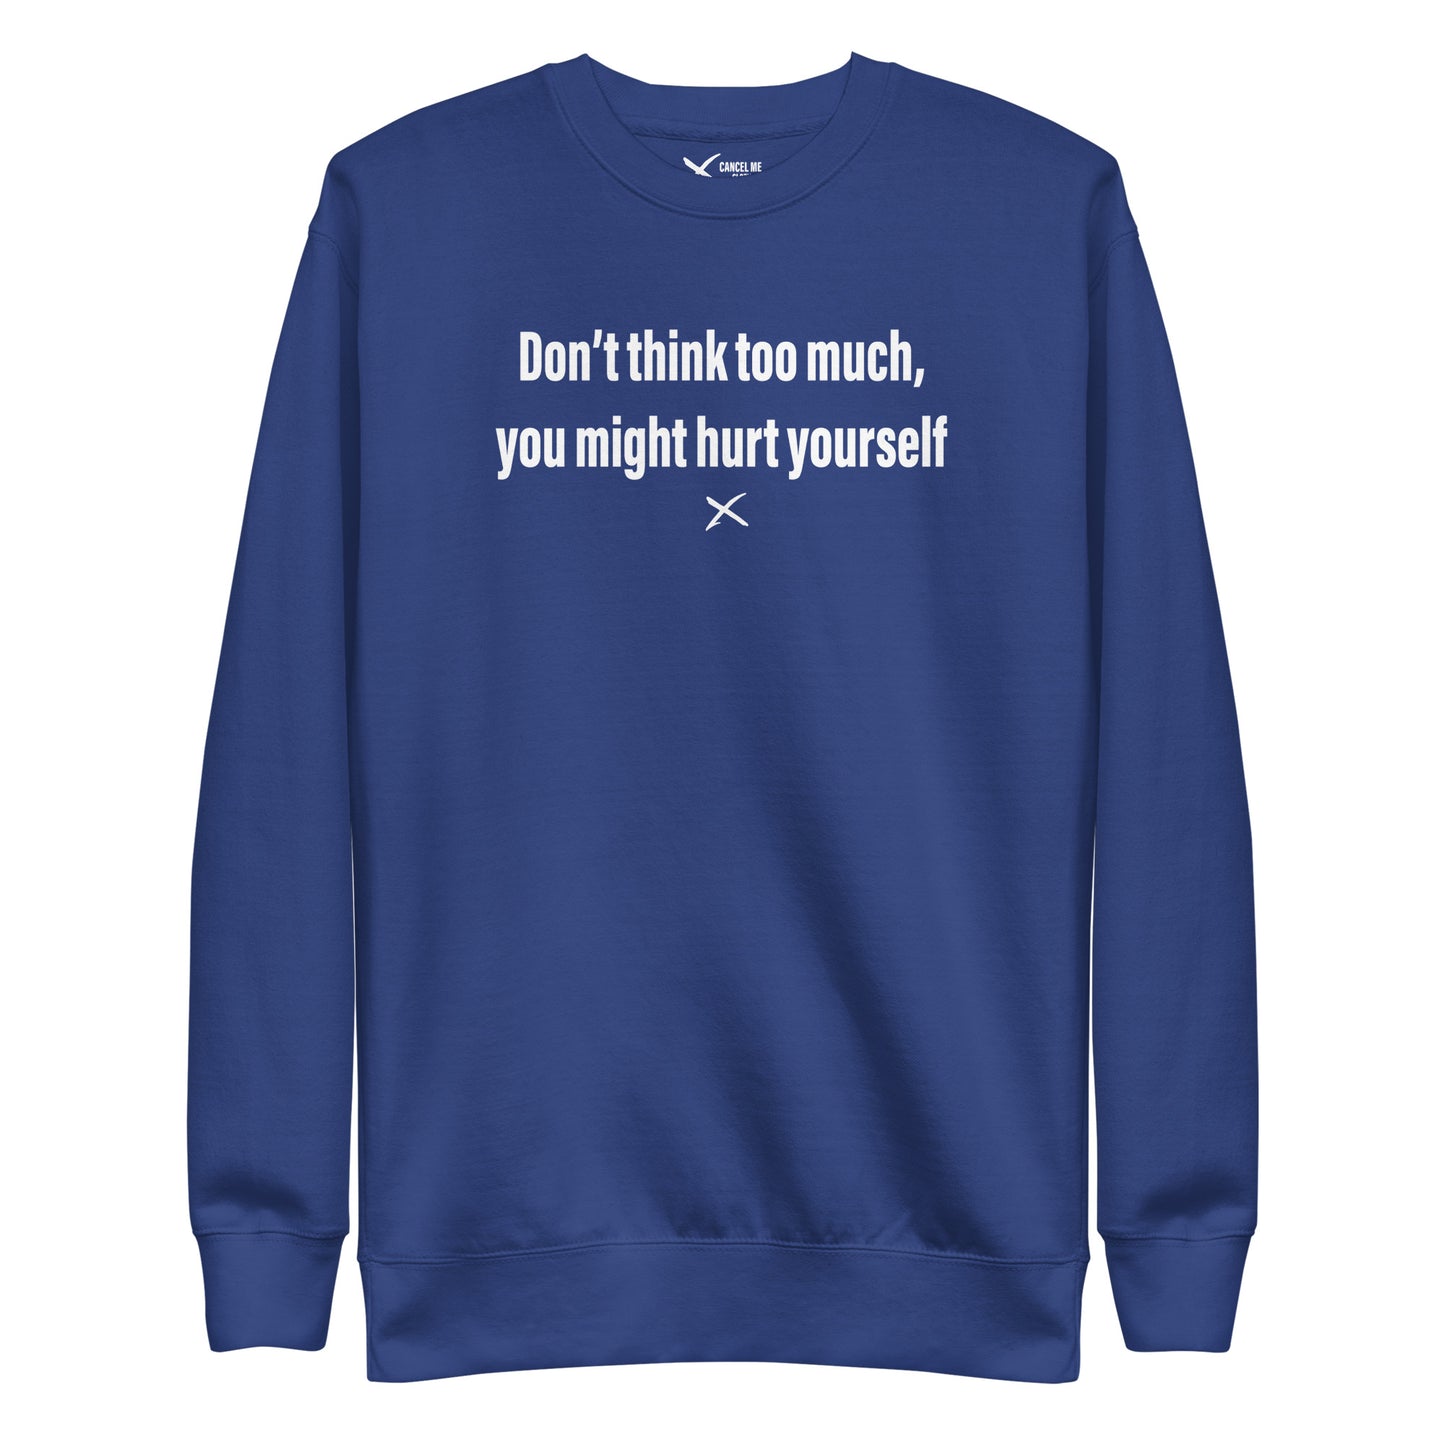 Don't think too much, you might hurt yourself - Sweatshirt